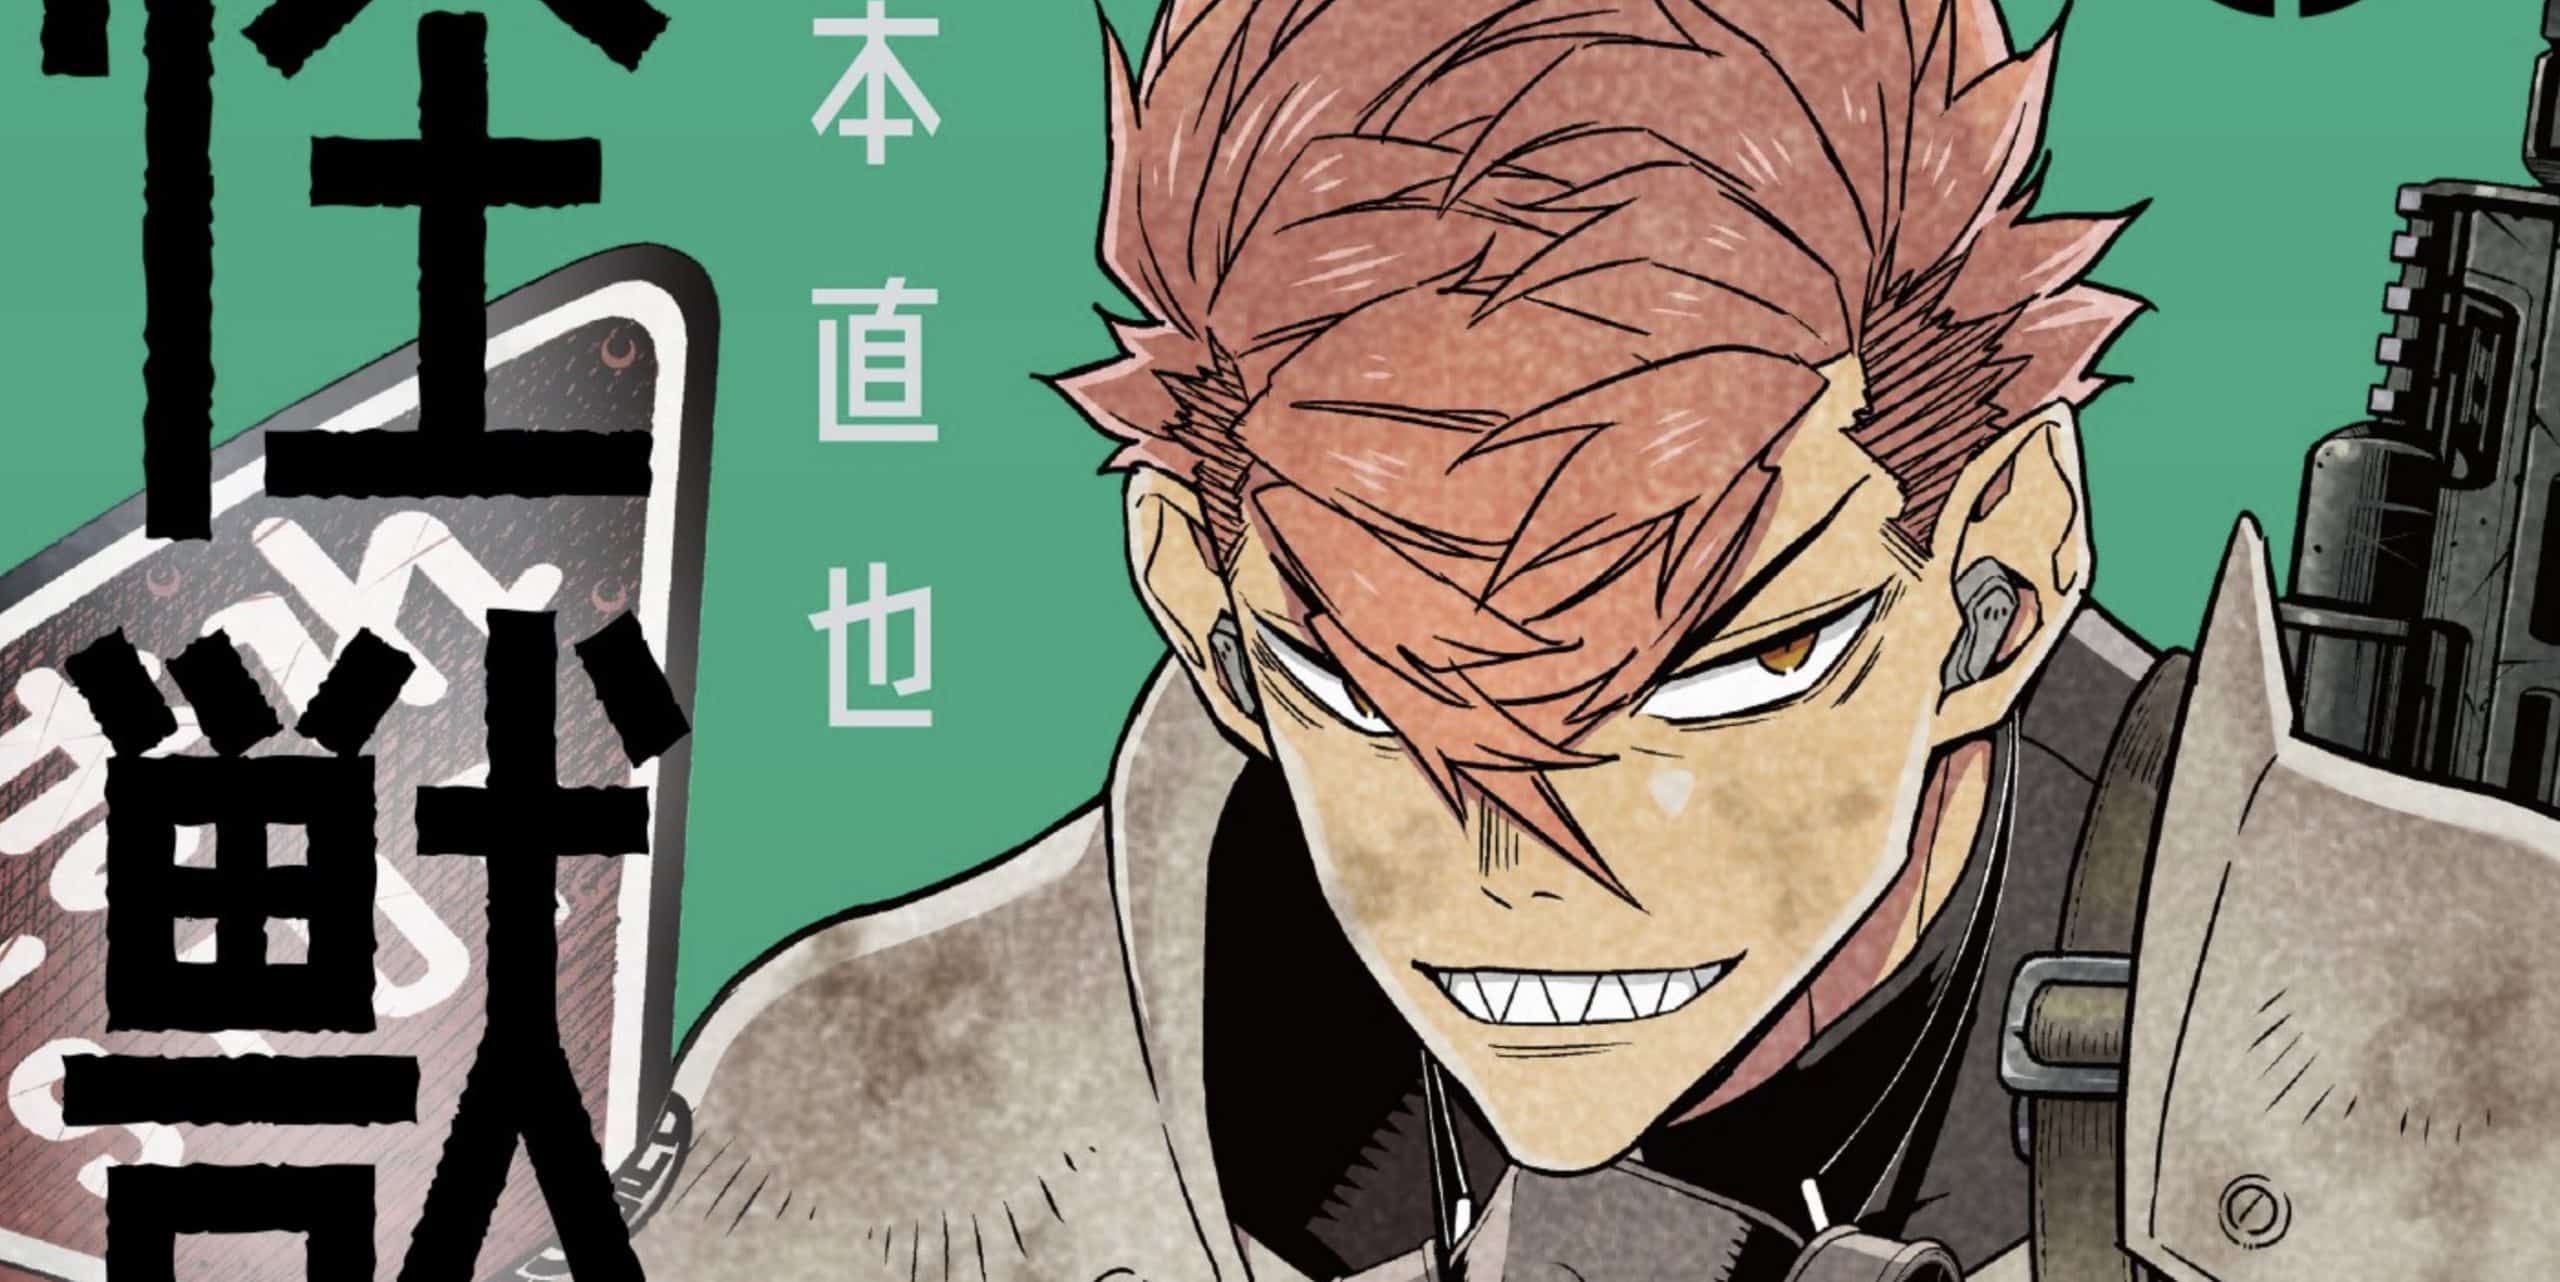 Monster #8 Chapter 89 release date